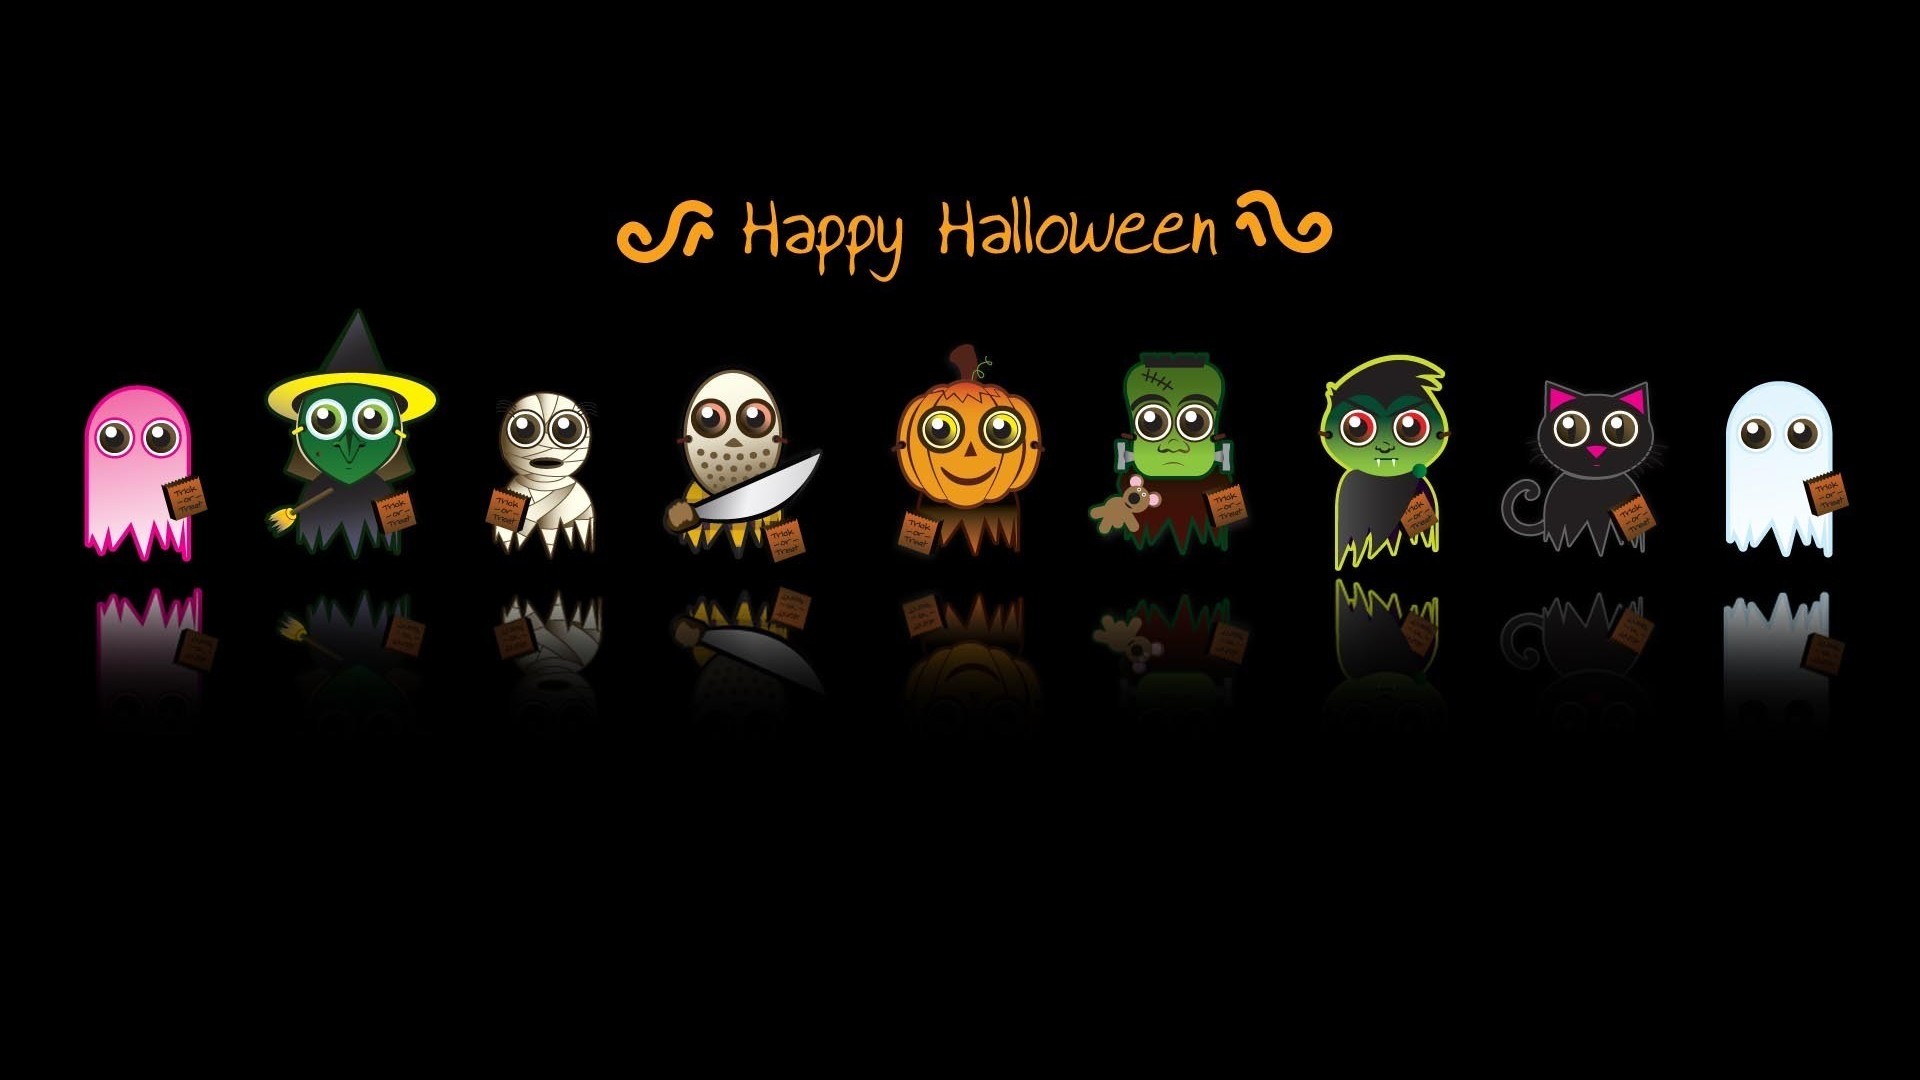 Wallpaper Cute Halloween HD With high-resolution 1920X1080 pixel. You can use this wallpaper for your Desktop Computer Backgrounds, Mac Wallpapers, Android Lock screen or iPhone Screensavers and another smartphone device